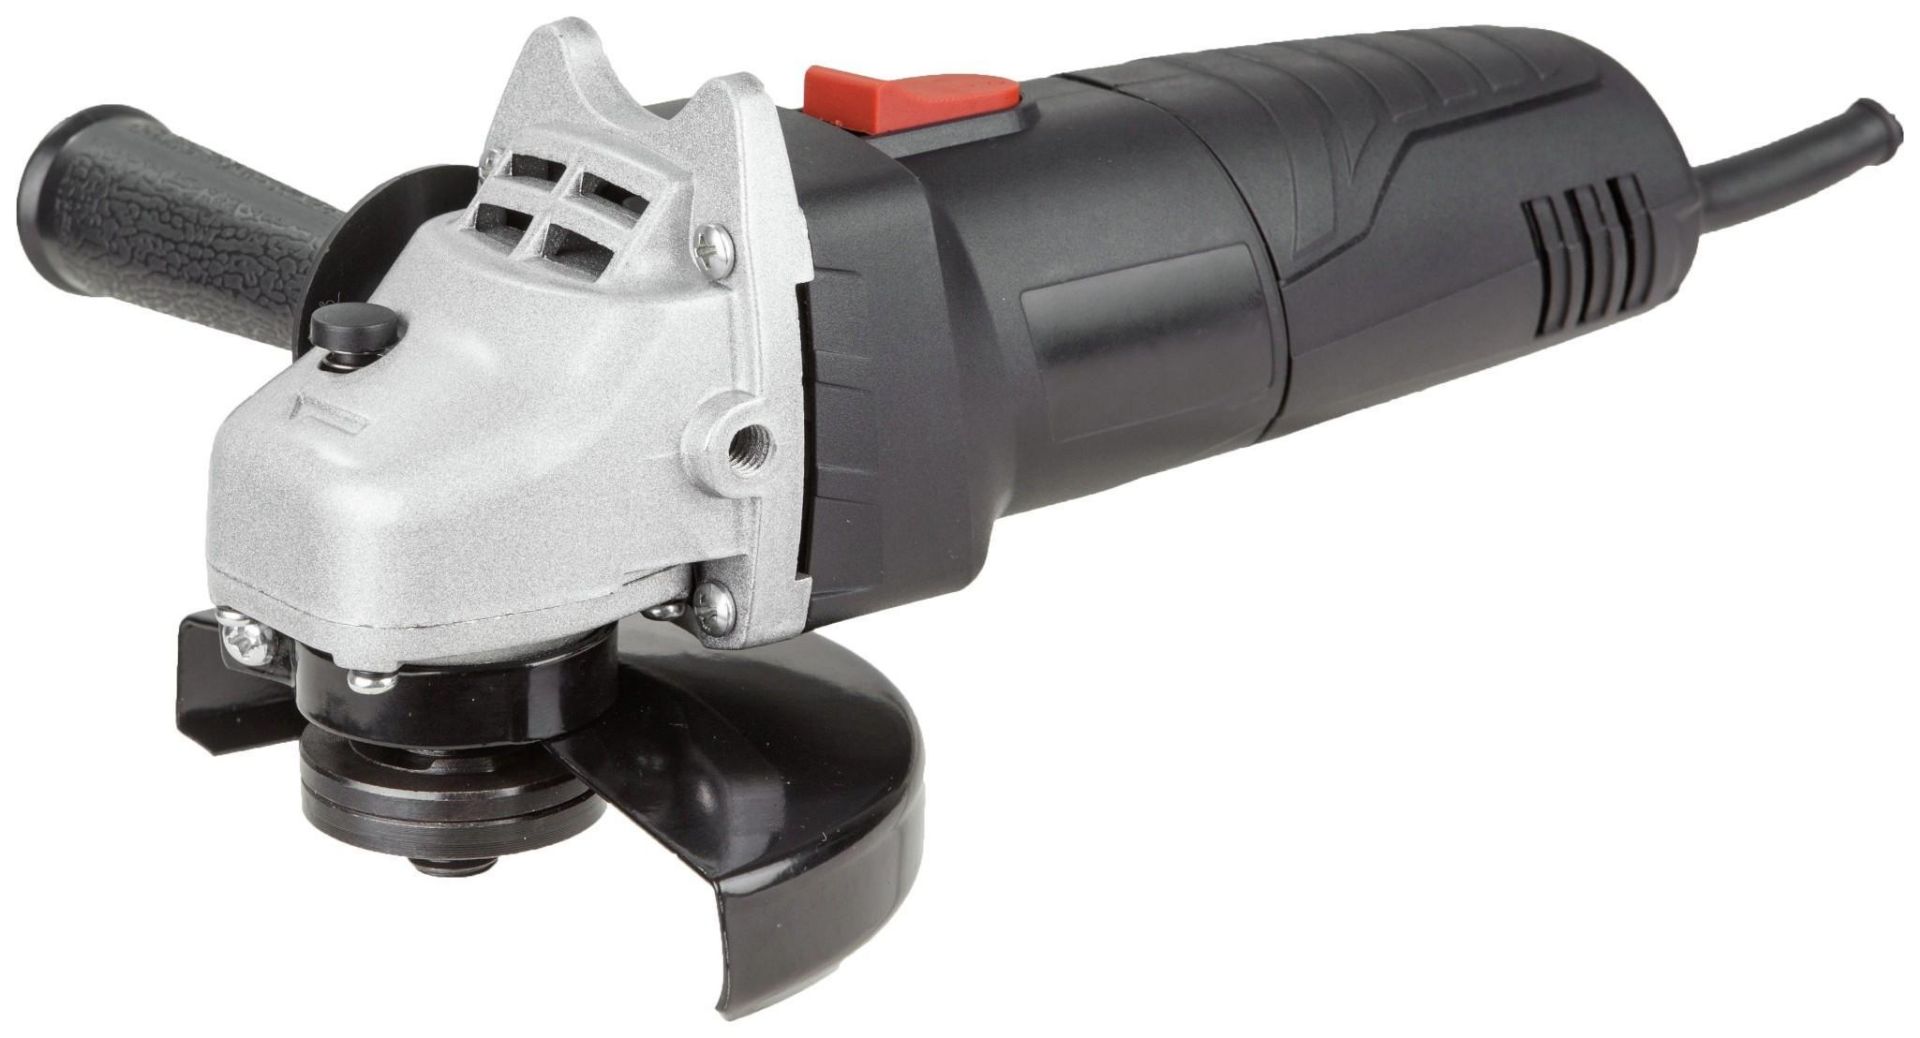 Simple Value 115mm Angle Grinder - 500W £15.00 RRP